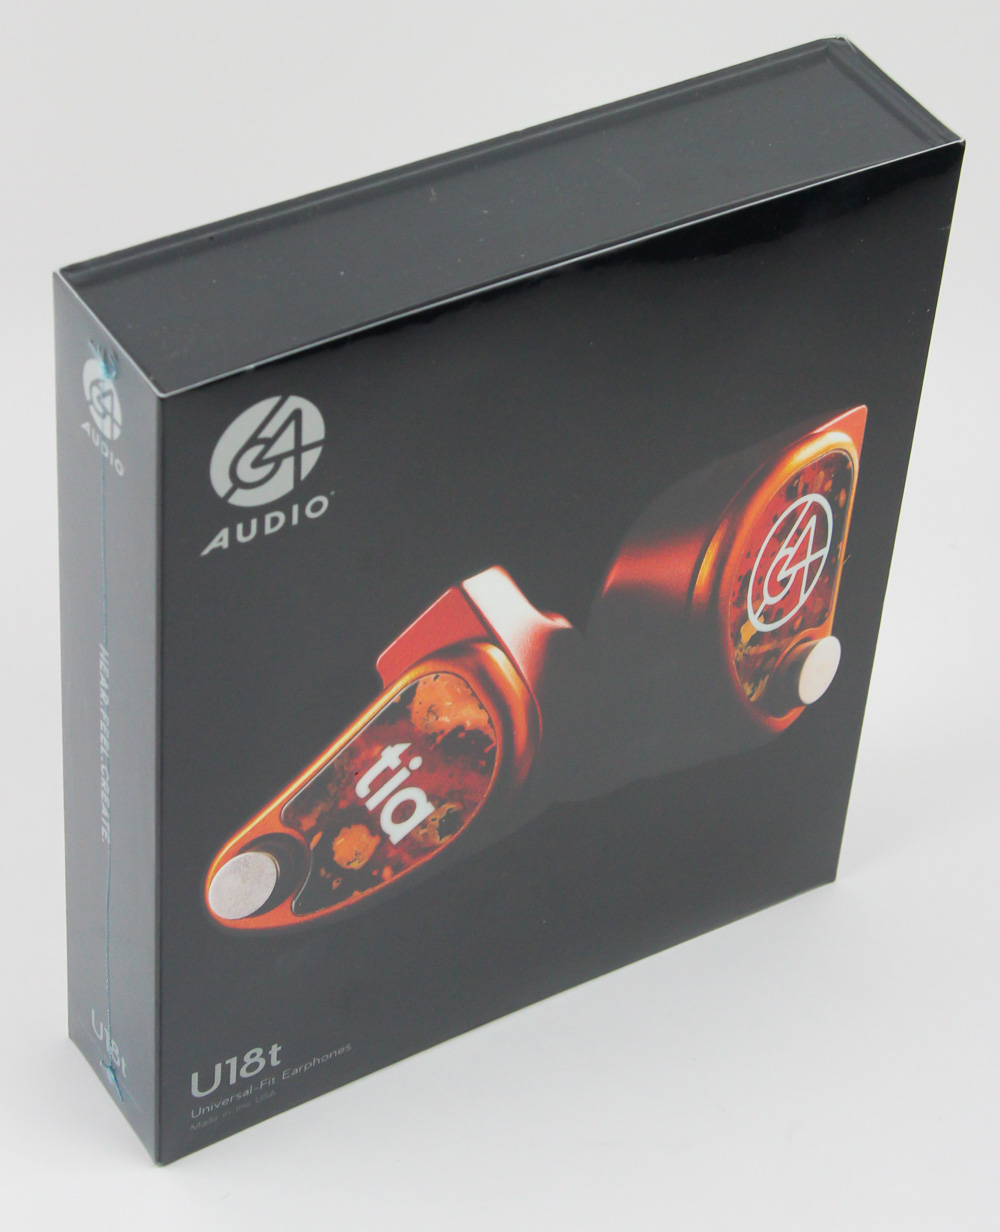 64 Audio U18t In-Ear Monitors Review - The Tzar of IEMs 